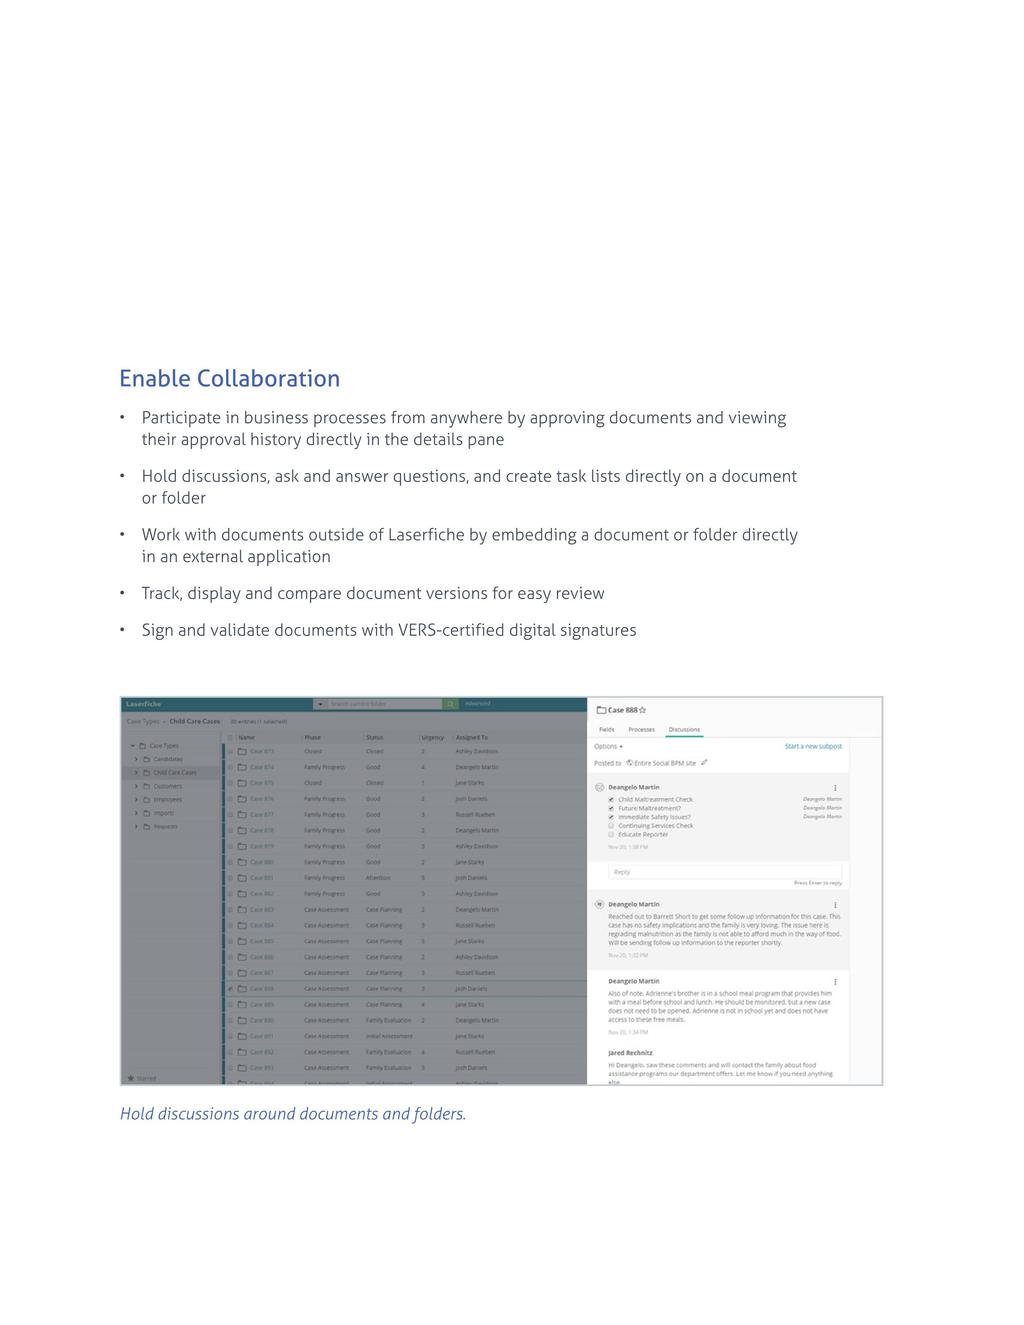 Enable Collaboration Participate in business processes from anywhere by approving documents and viewing their approval history directly in the details pane Hold discussions, ask and answer questions,